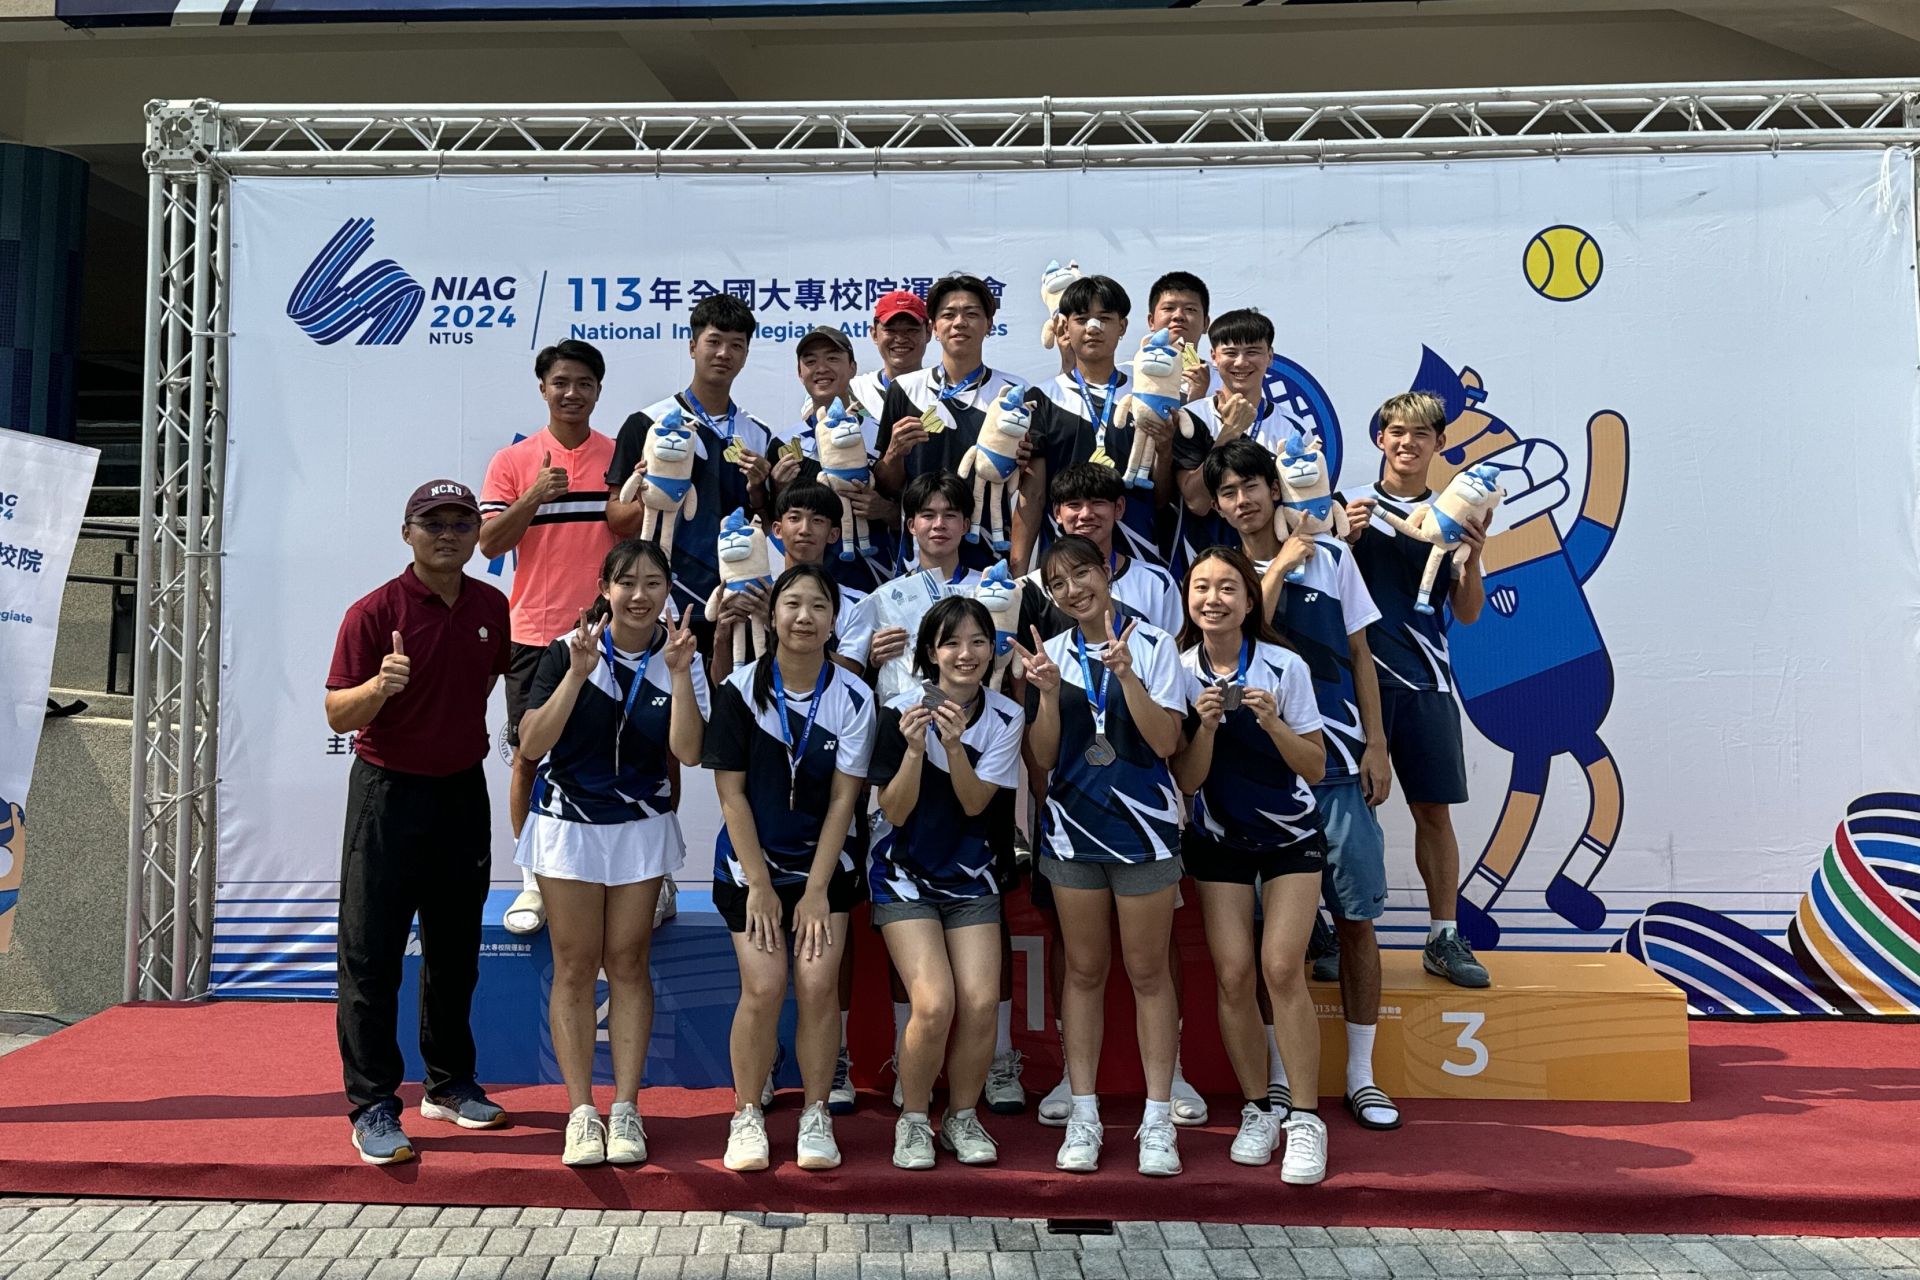 113th NIAG: NCKU Secures 6 Gold, 17 Silver, and 14 Bronze Medals, Men's Tennis Champions Achieve Four-Peat